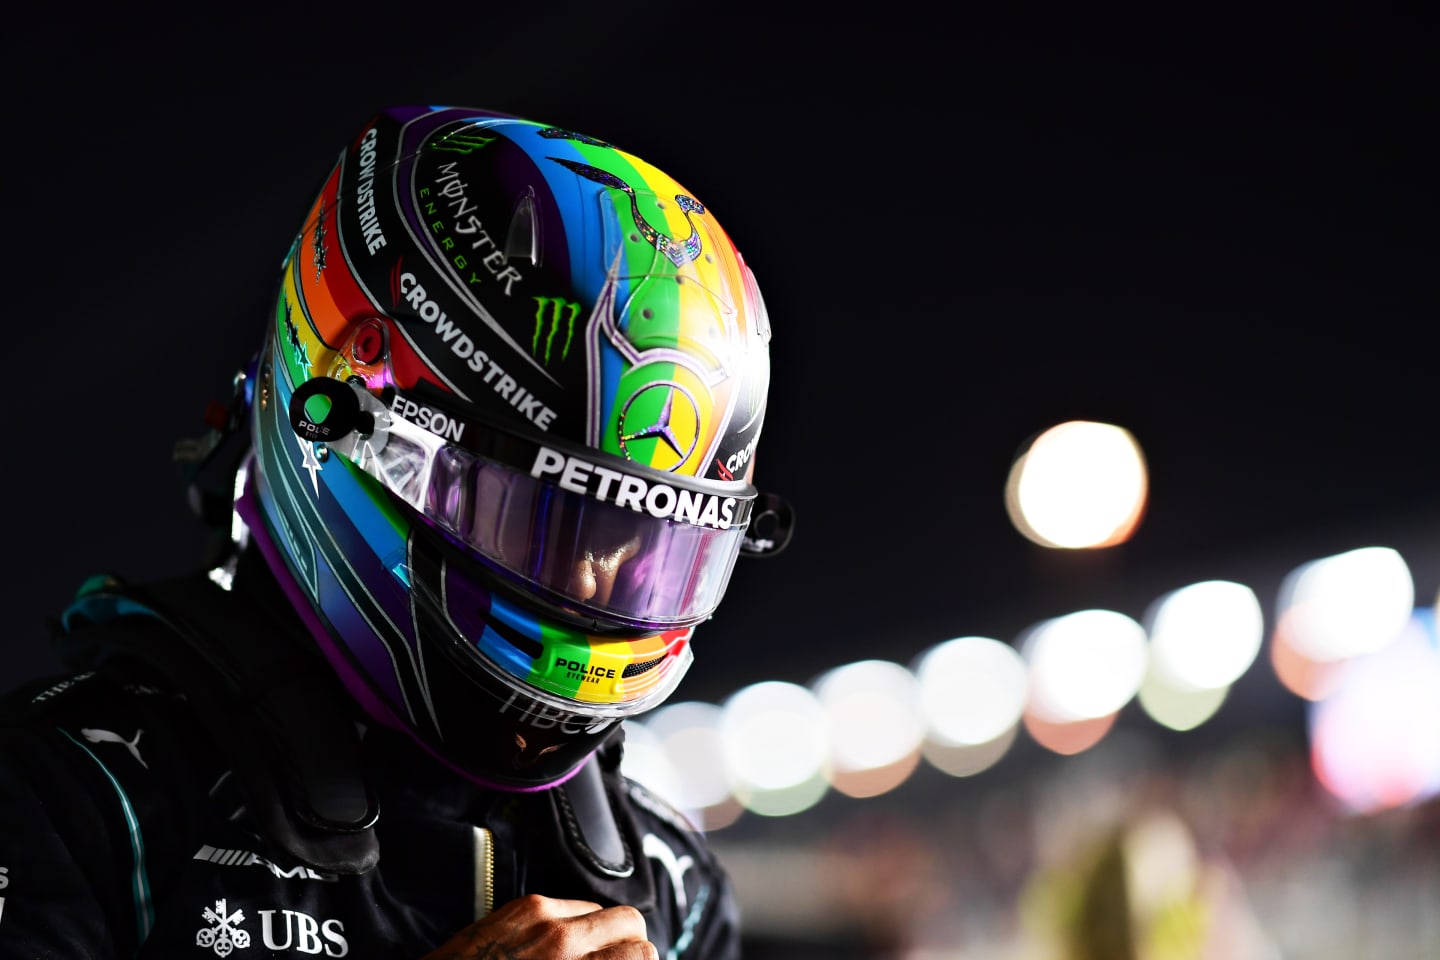 DOHA, QATAR - NOVEMBER 20: Pole position qualifier Lewis Hamilton of Great Britain and Mercedes GP looks on in parc ferme after qualifying ahead of the F1 Grand Prix of Qatar at Losail International Circuit on November 20, 2021 in Doha, Qatar. (Photo by Mario Renzi - Formula 1/Formula 1 via Getty Images)